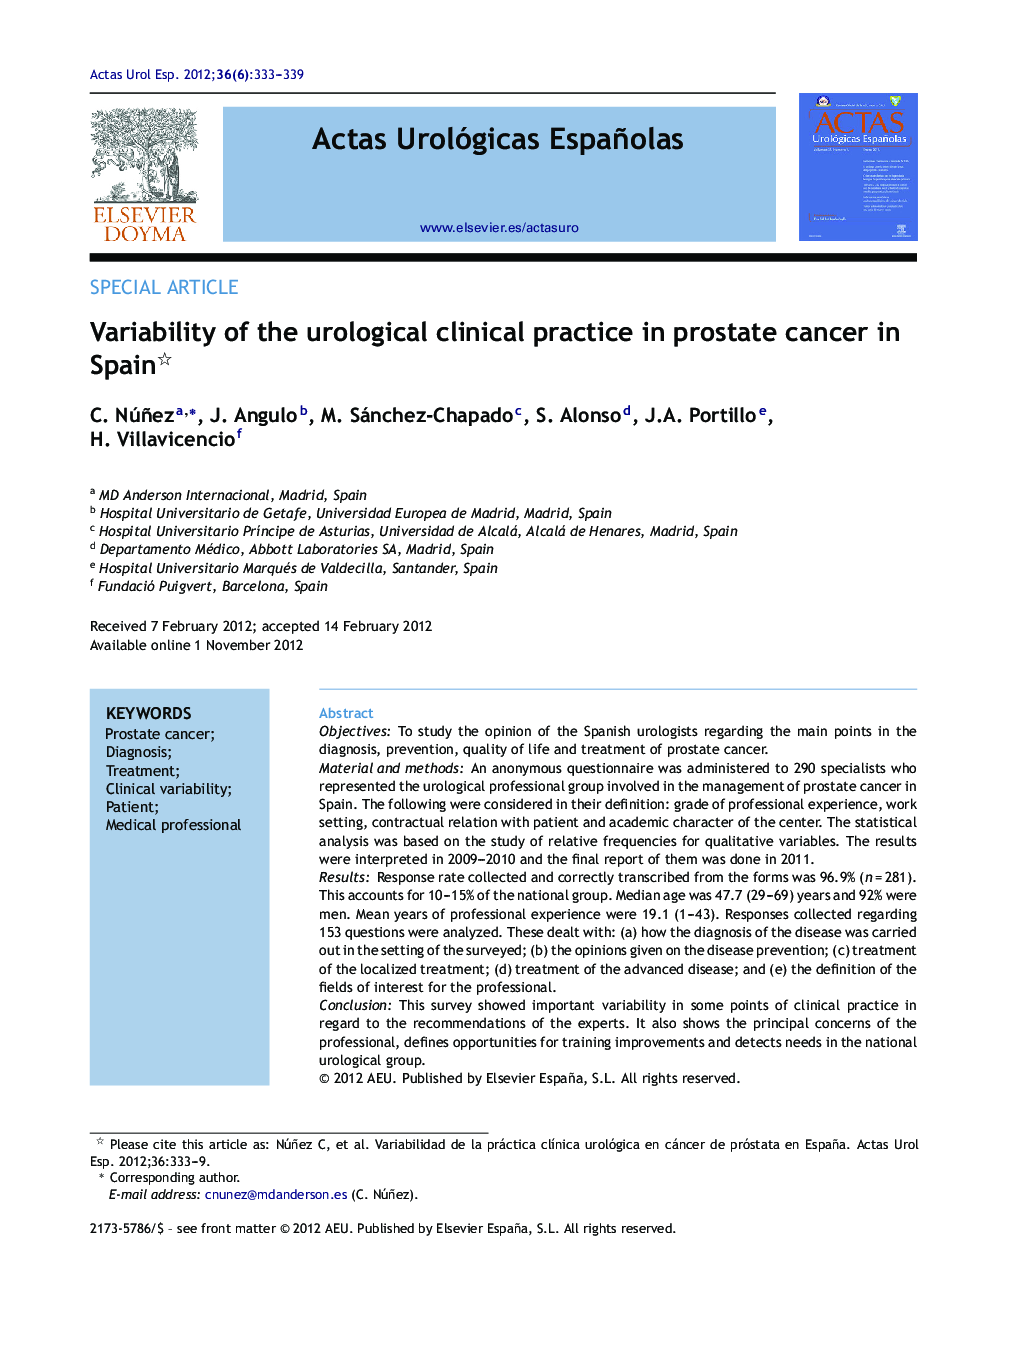 Variability of the urological clinical practice in prostate cancer in Spain